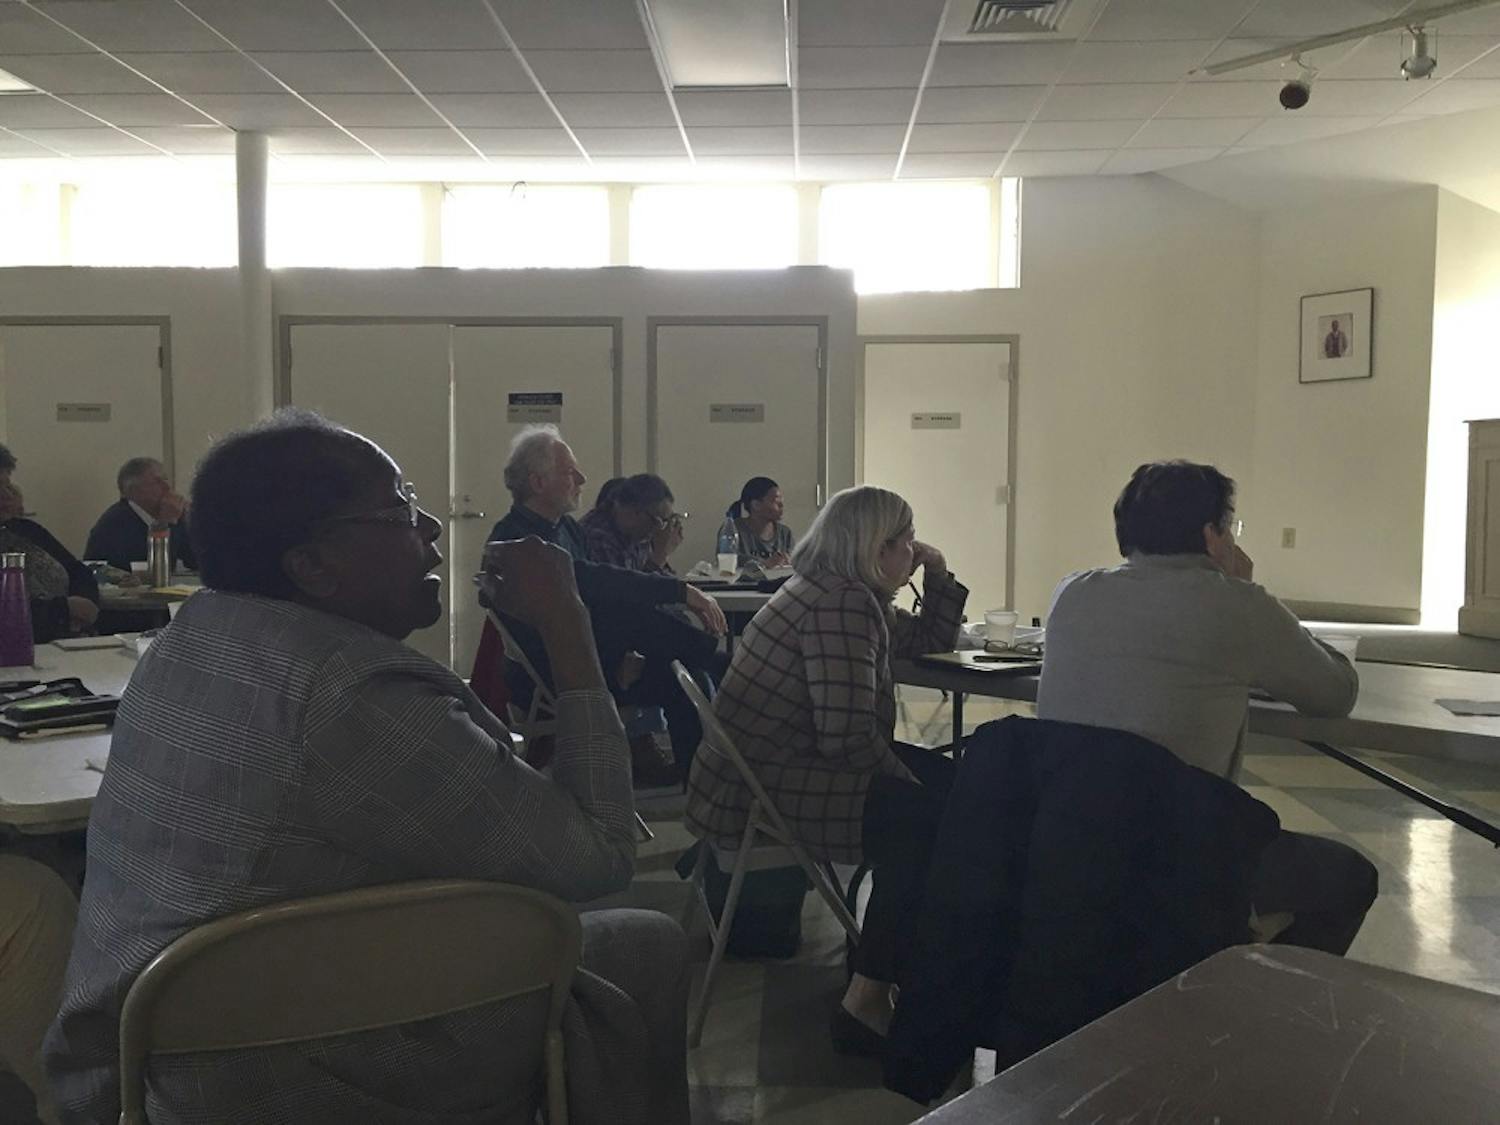 Chapel Hill townspeople met at Hargraves Community Center to give input on future development of West Rosemary street.